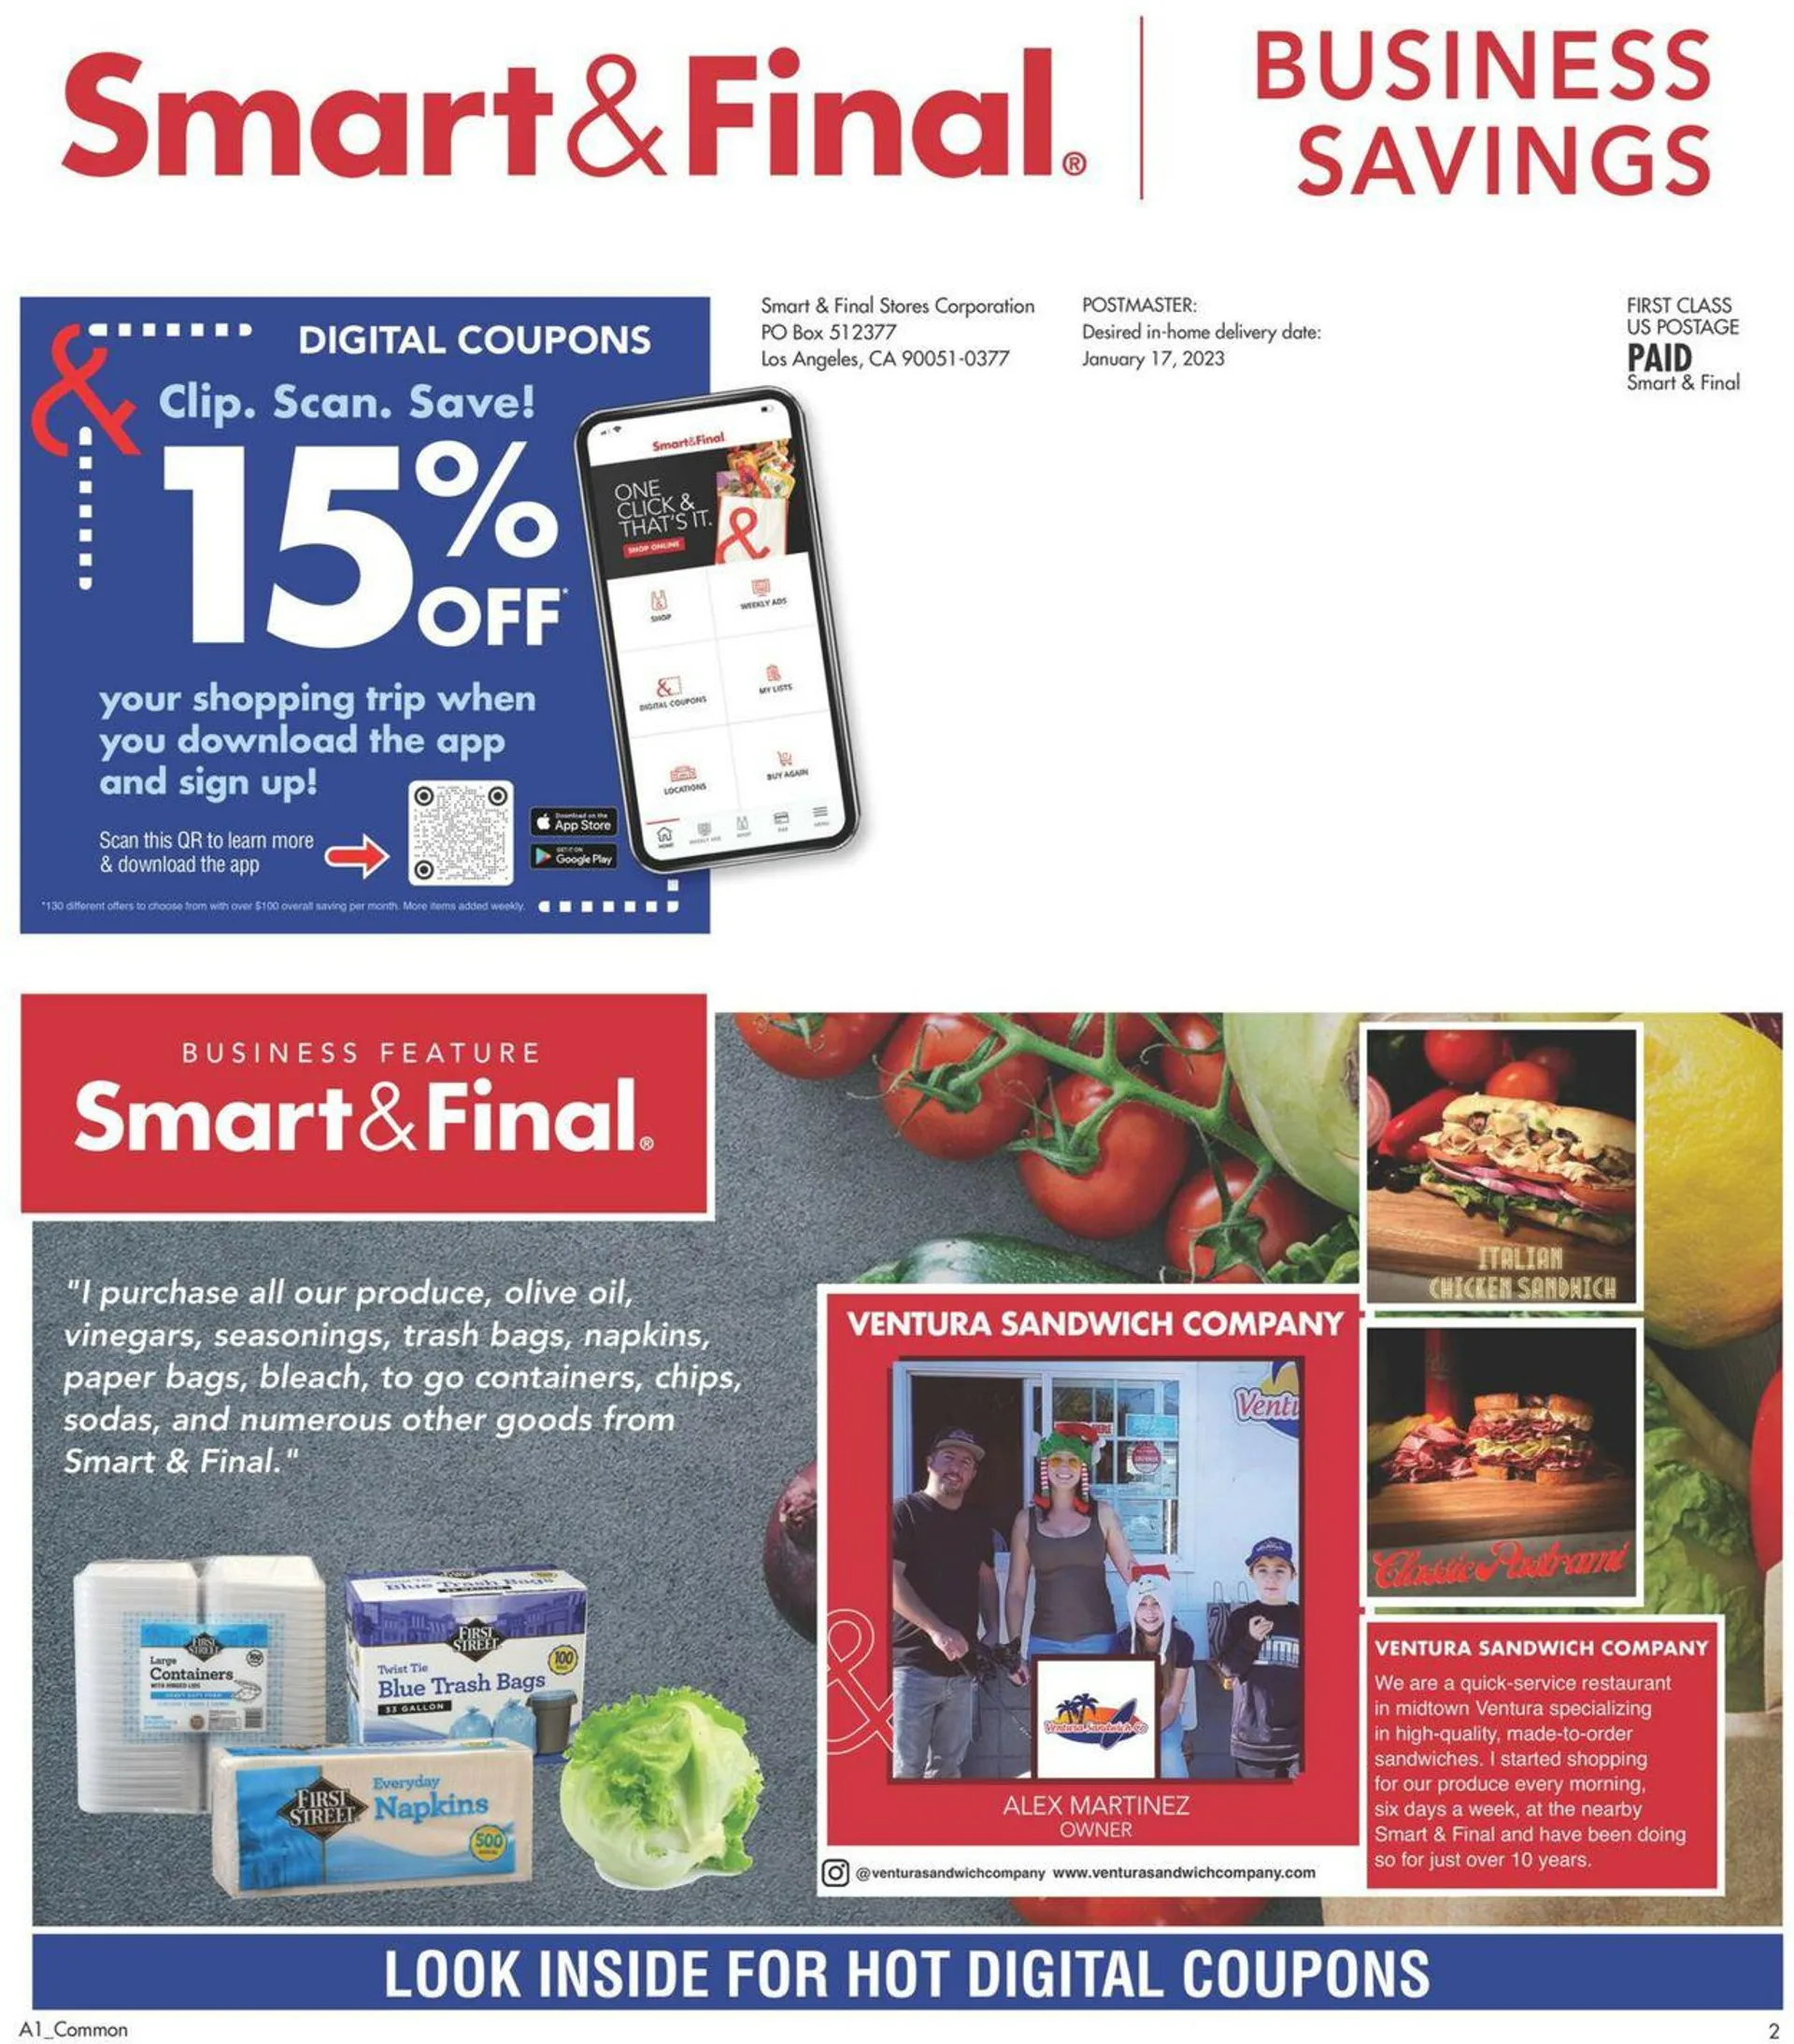 Smart and Final Current weekly ad - 1